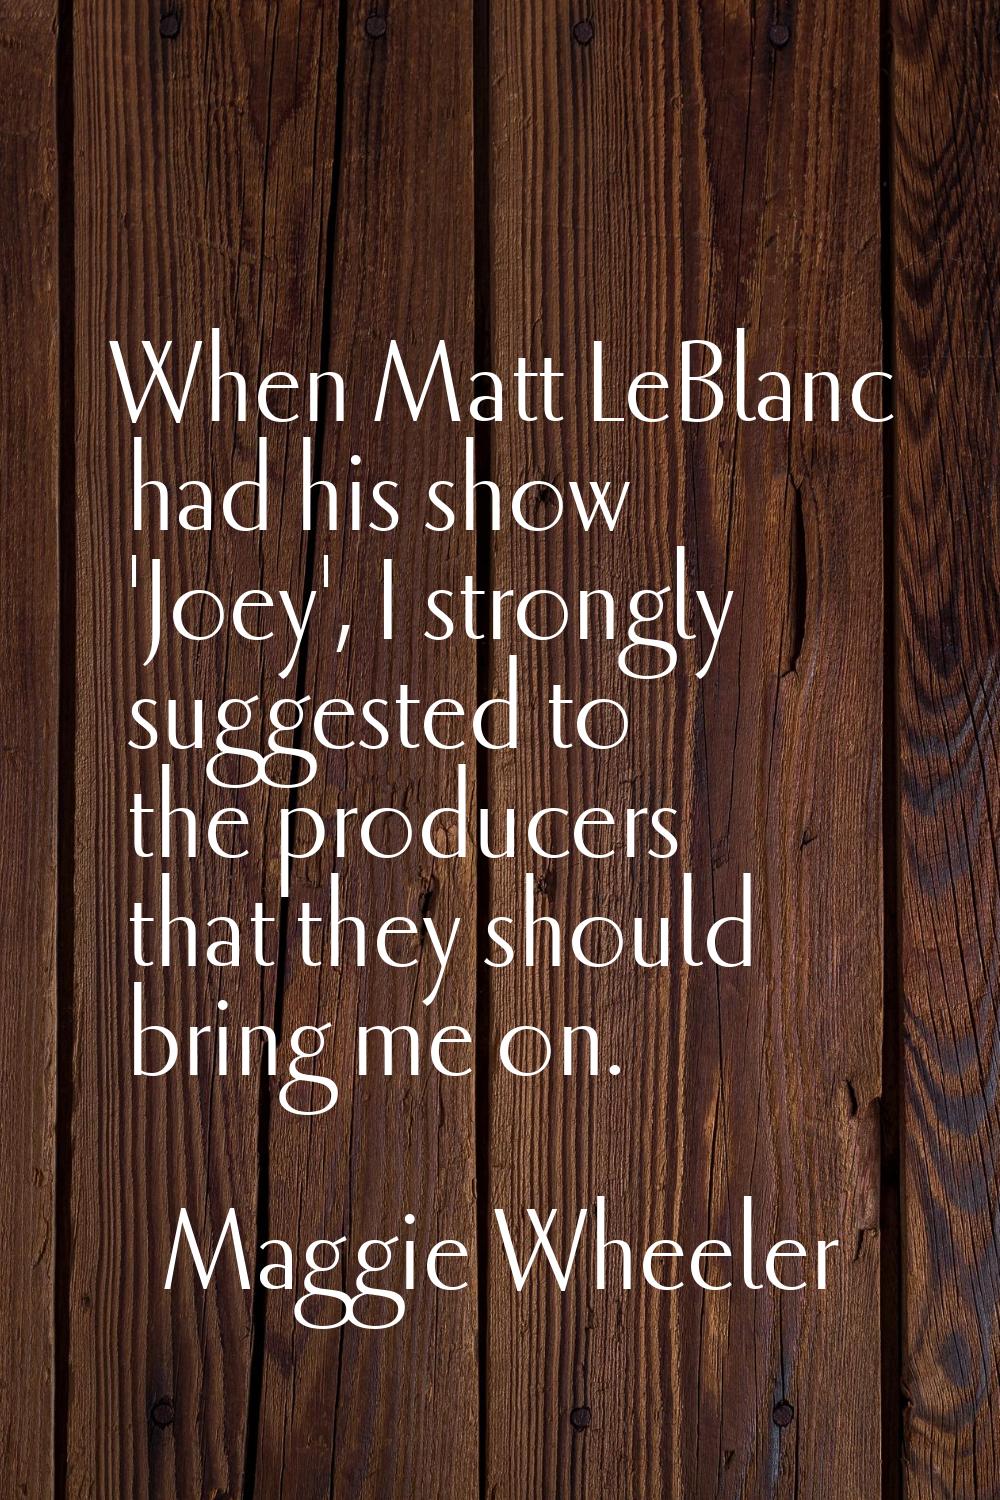 When Matt LeBlanc had his show 'Joey', I strongly suggested to the producers that they should bring